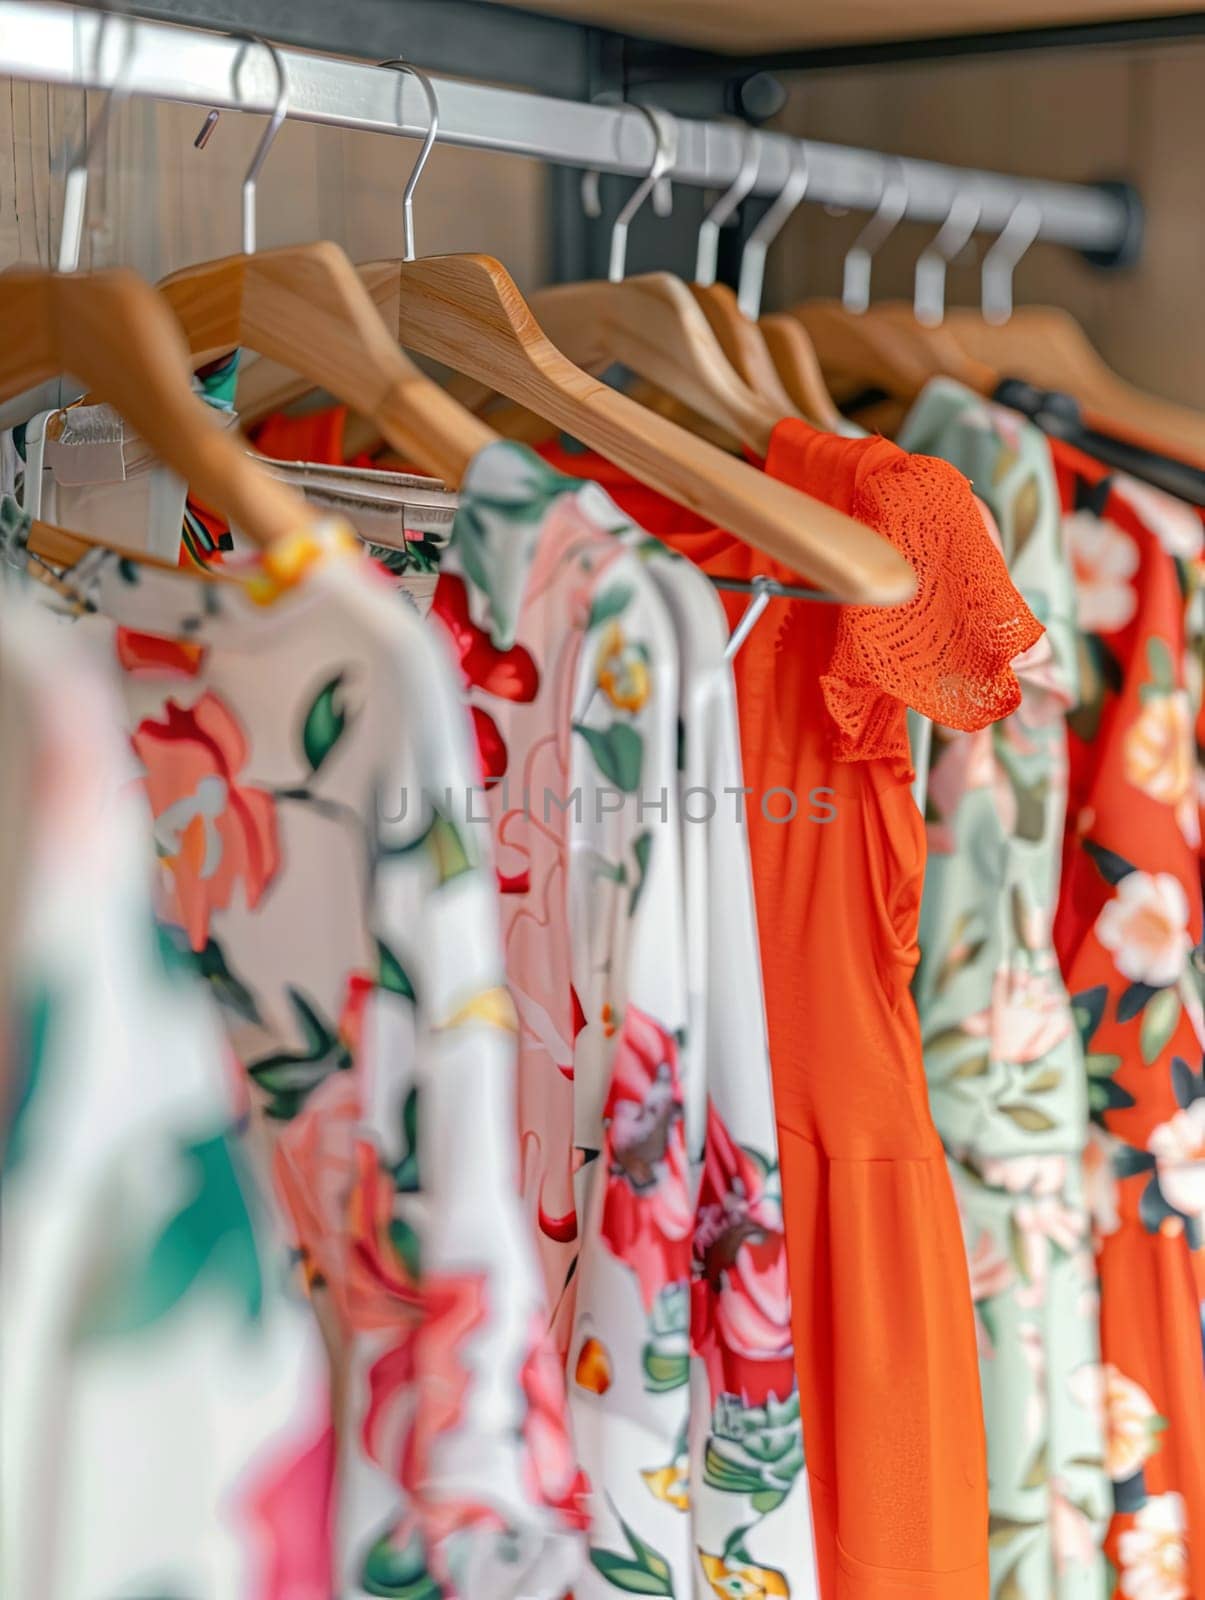 A variety of shirts hanging neatly on a rack in a fashionable womens closet. Represents a creative concept of a clothing showroom or designer store.